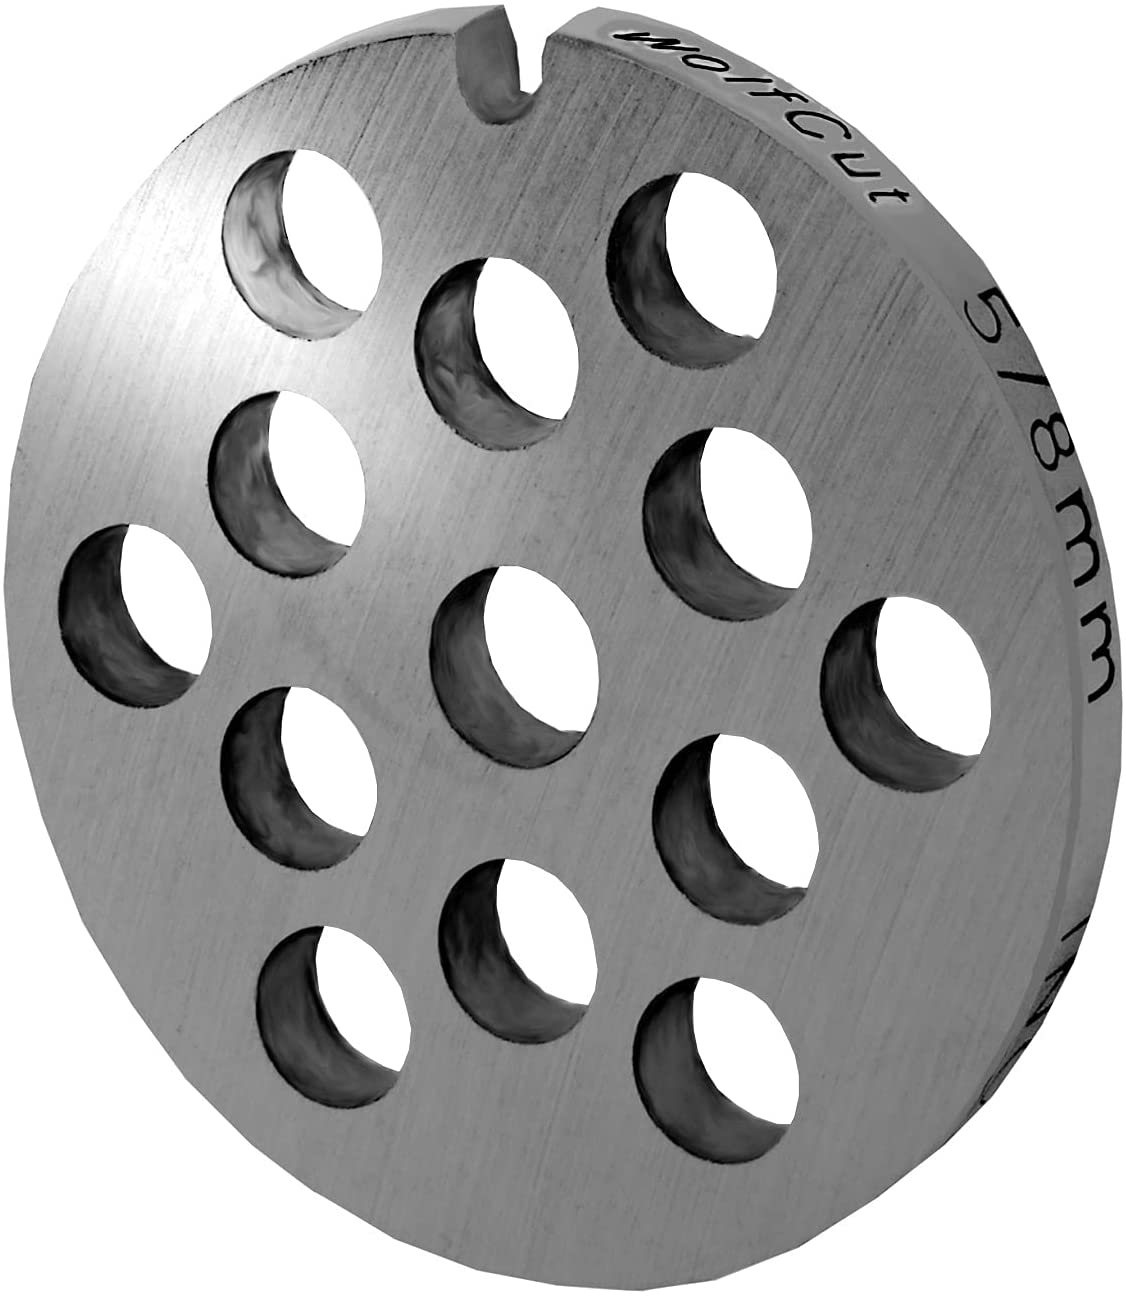 WolfCut Perforated disc size 5 with 8.0 mm bore